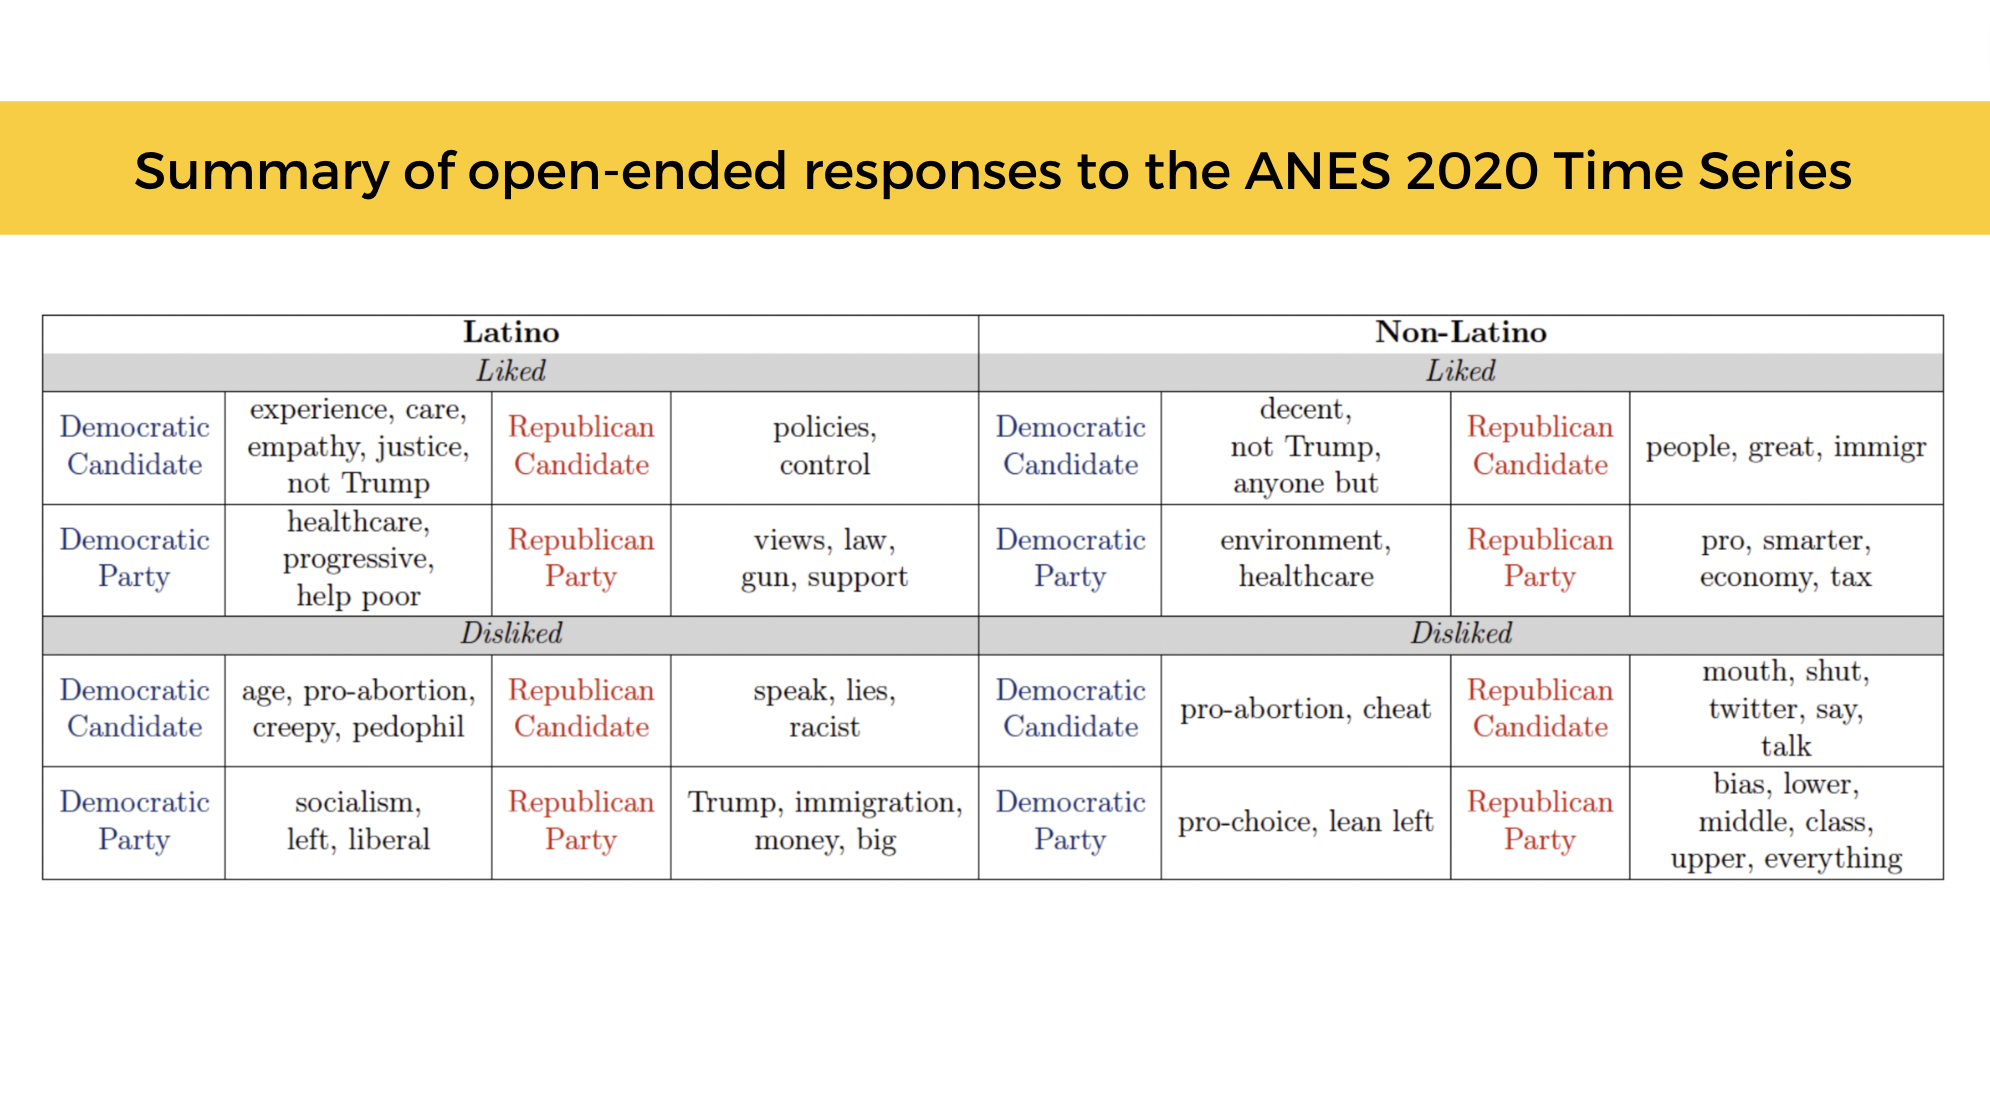 Summary of open-ended responses to the ANES 2020 Time Series